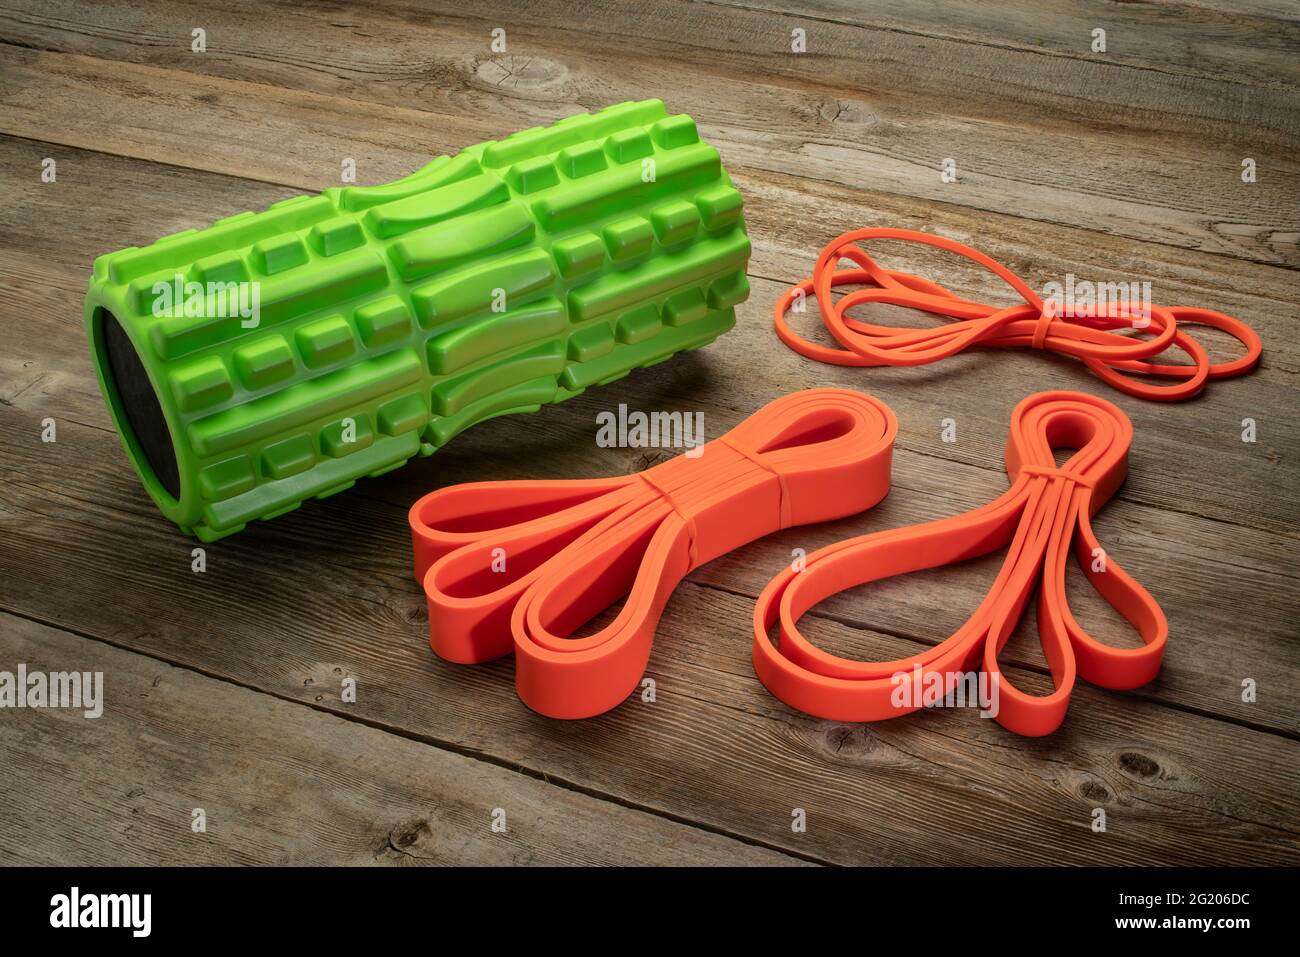 foam roller and resistance bands, exercise, therapy, recovery and rehabilitation concept Stock Photo